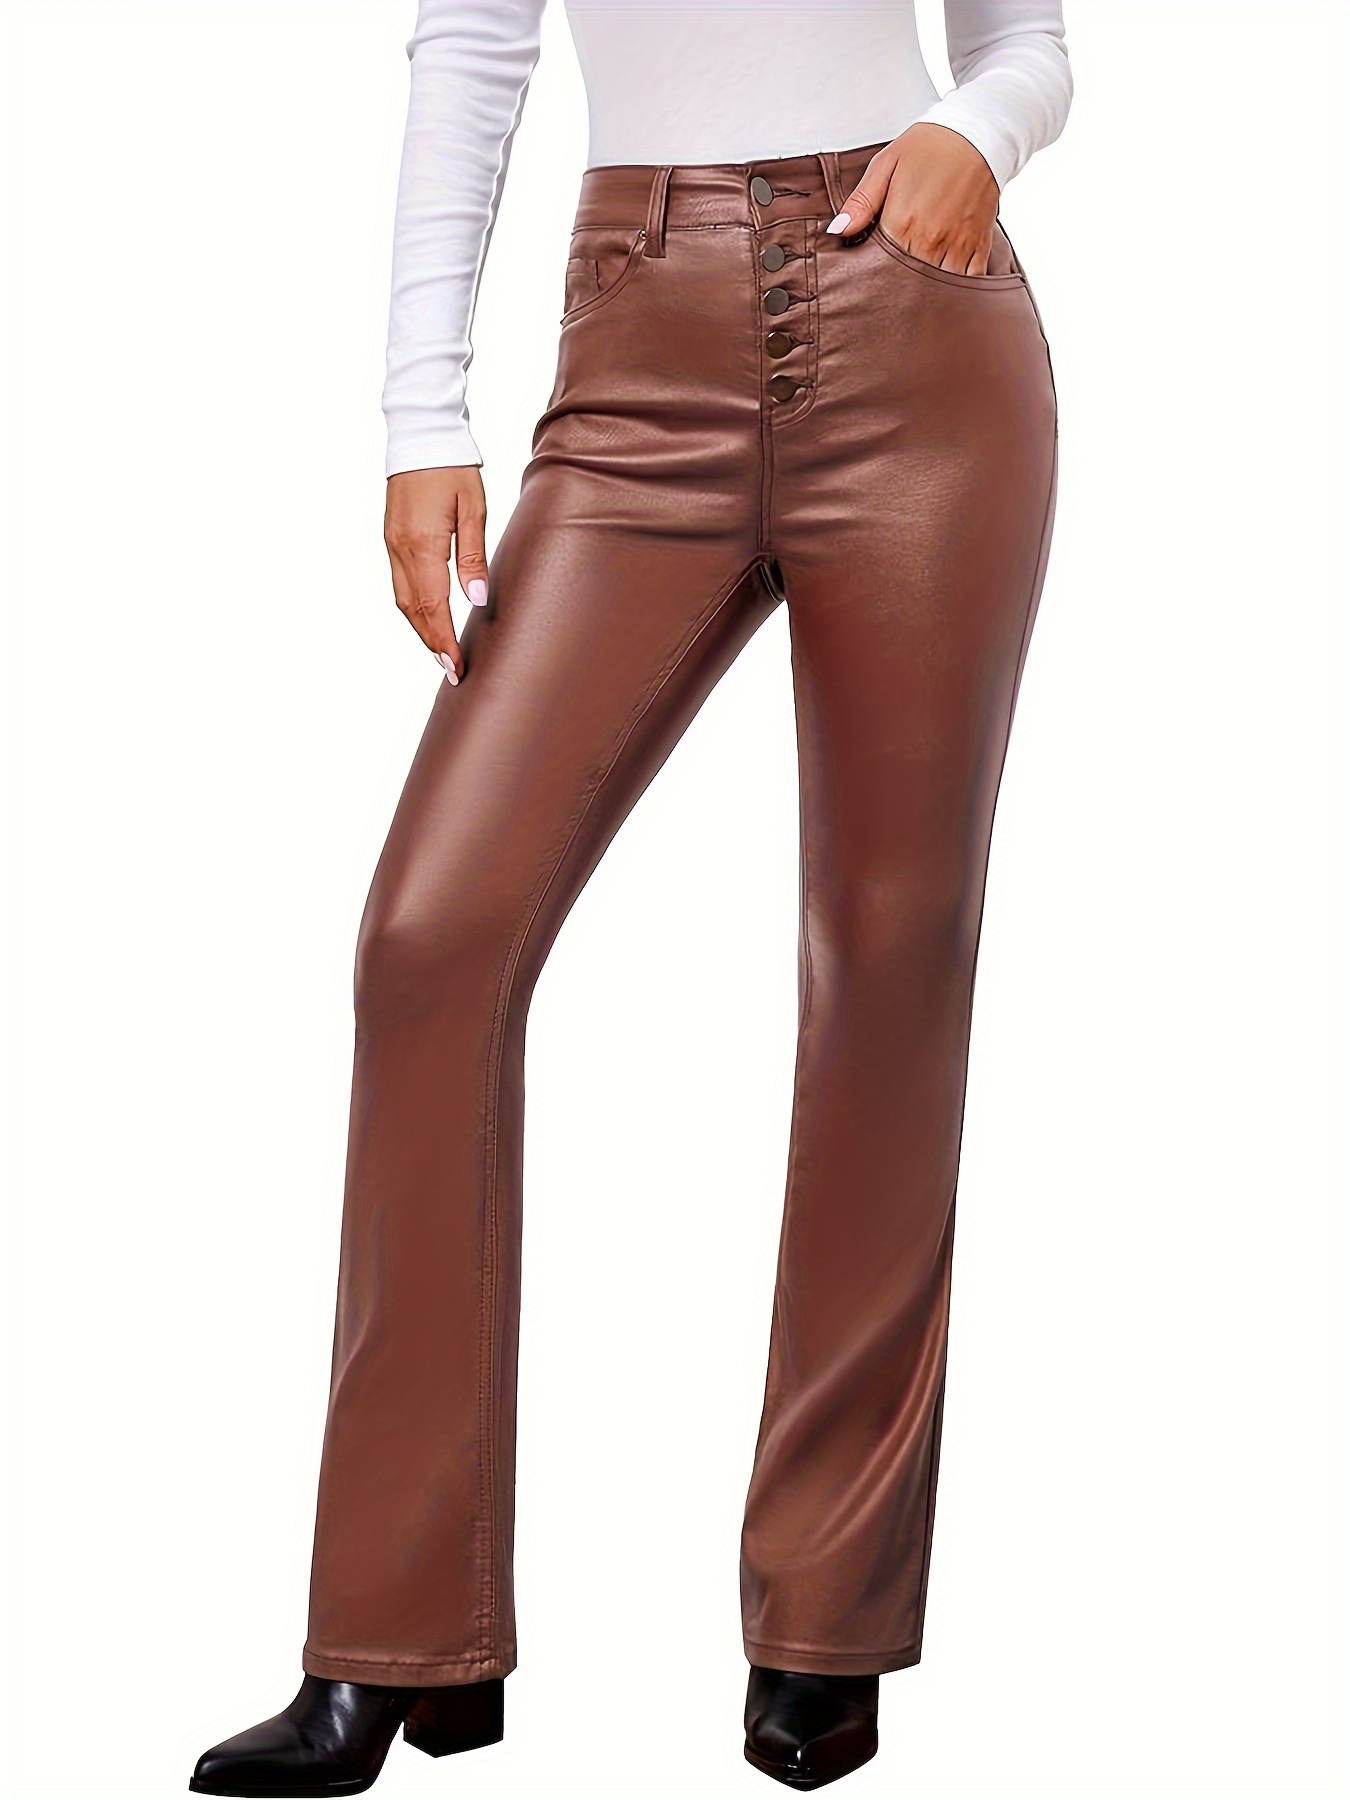 🧡 Brown Leather pants - Shop the pin!